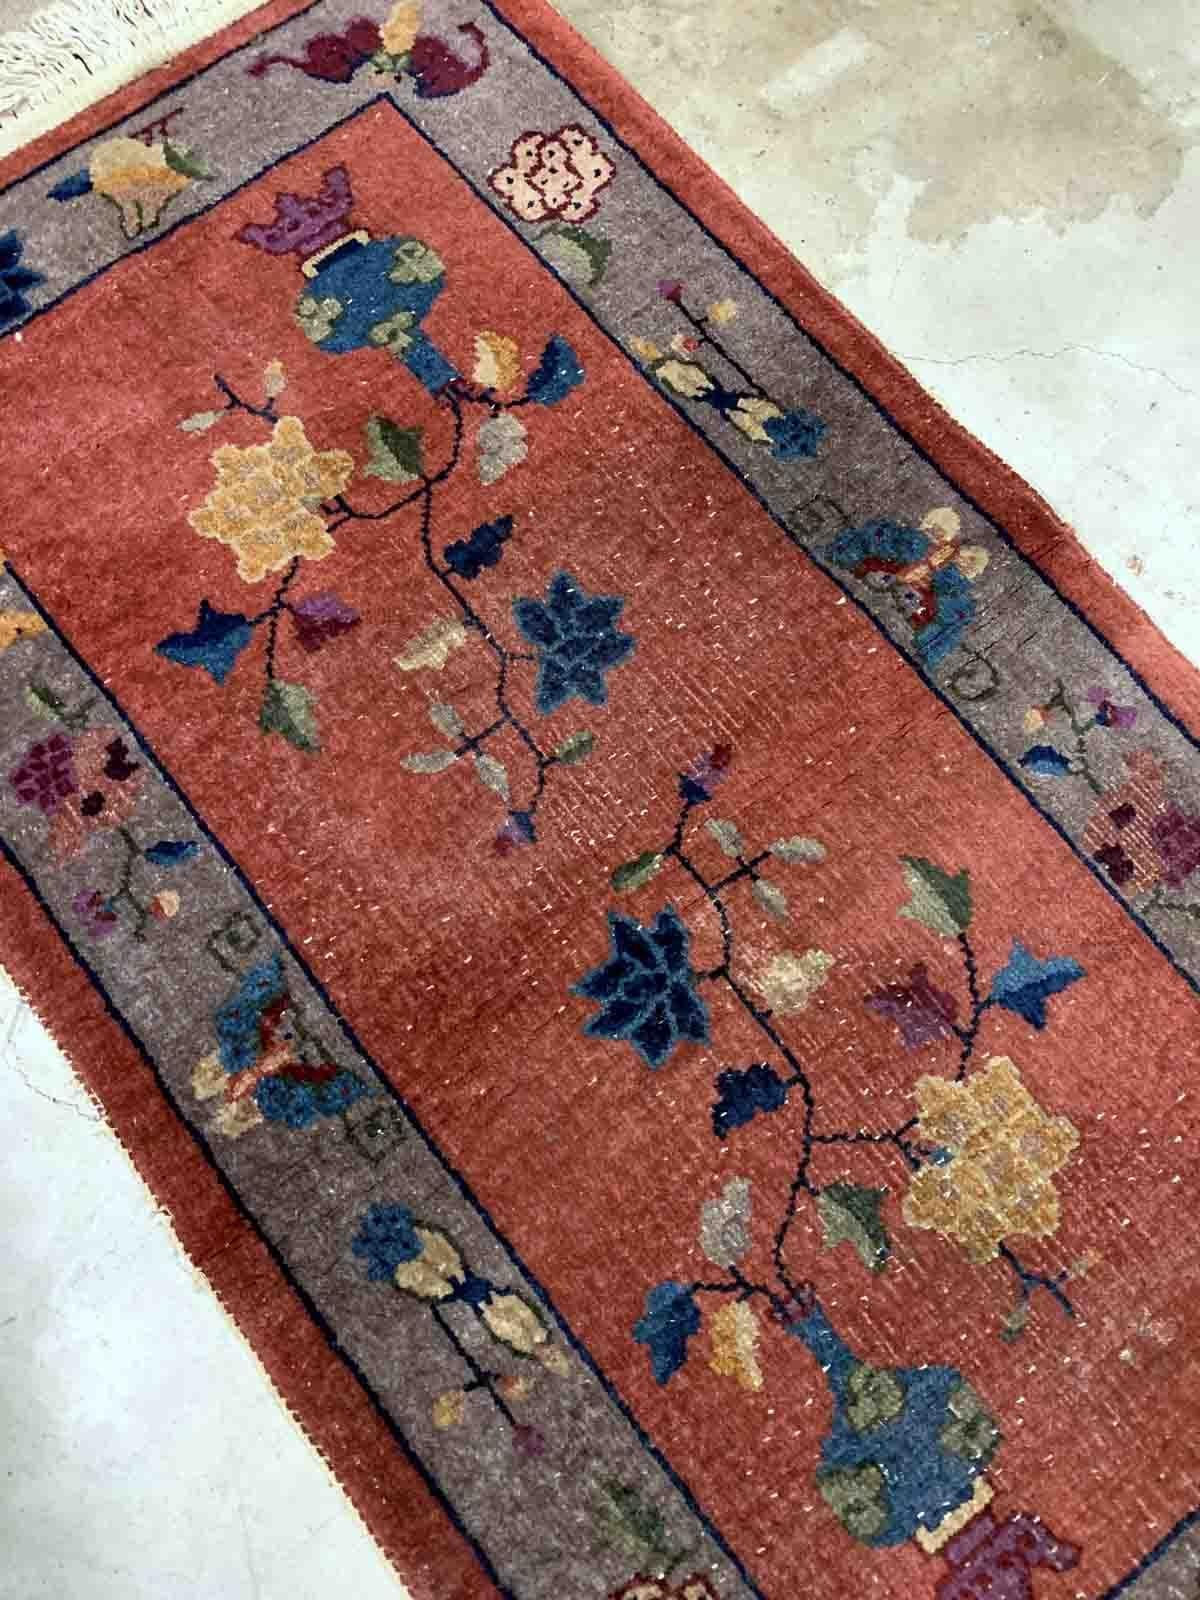 Handmade antique Art Deco Chinese rug in red shade with greyish border. The rug has traditional floral Art Deco design. It is from the beginning of 20th century in original condition, it has some low pile.

-condition: original, some low